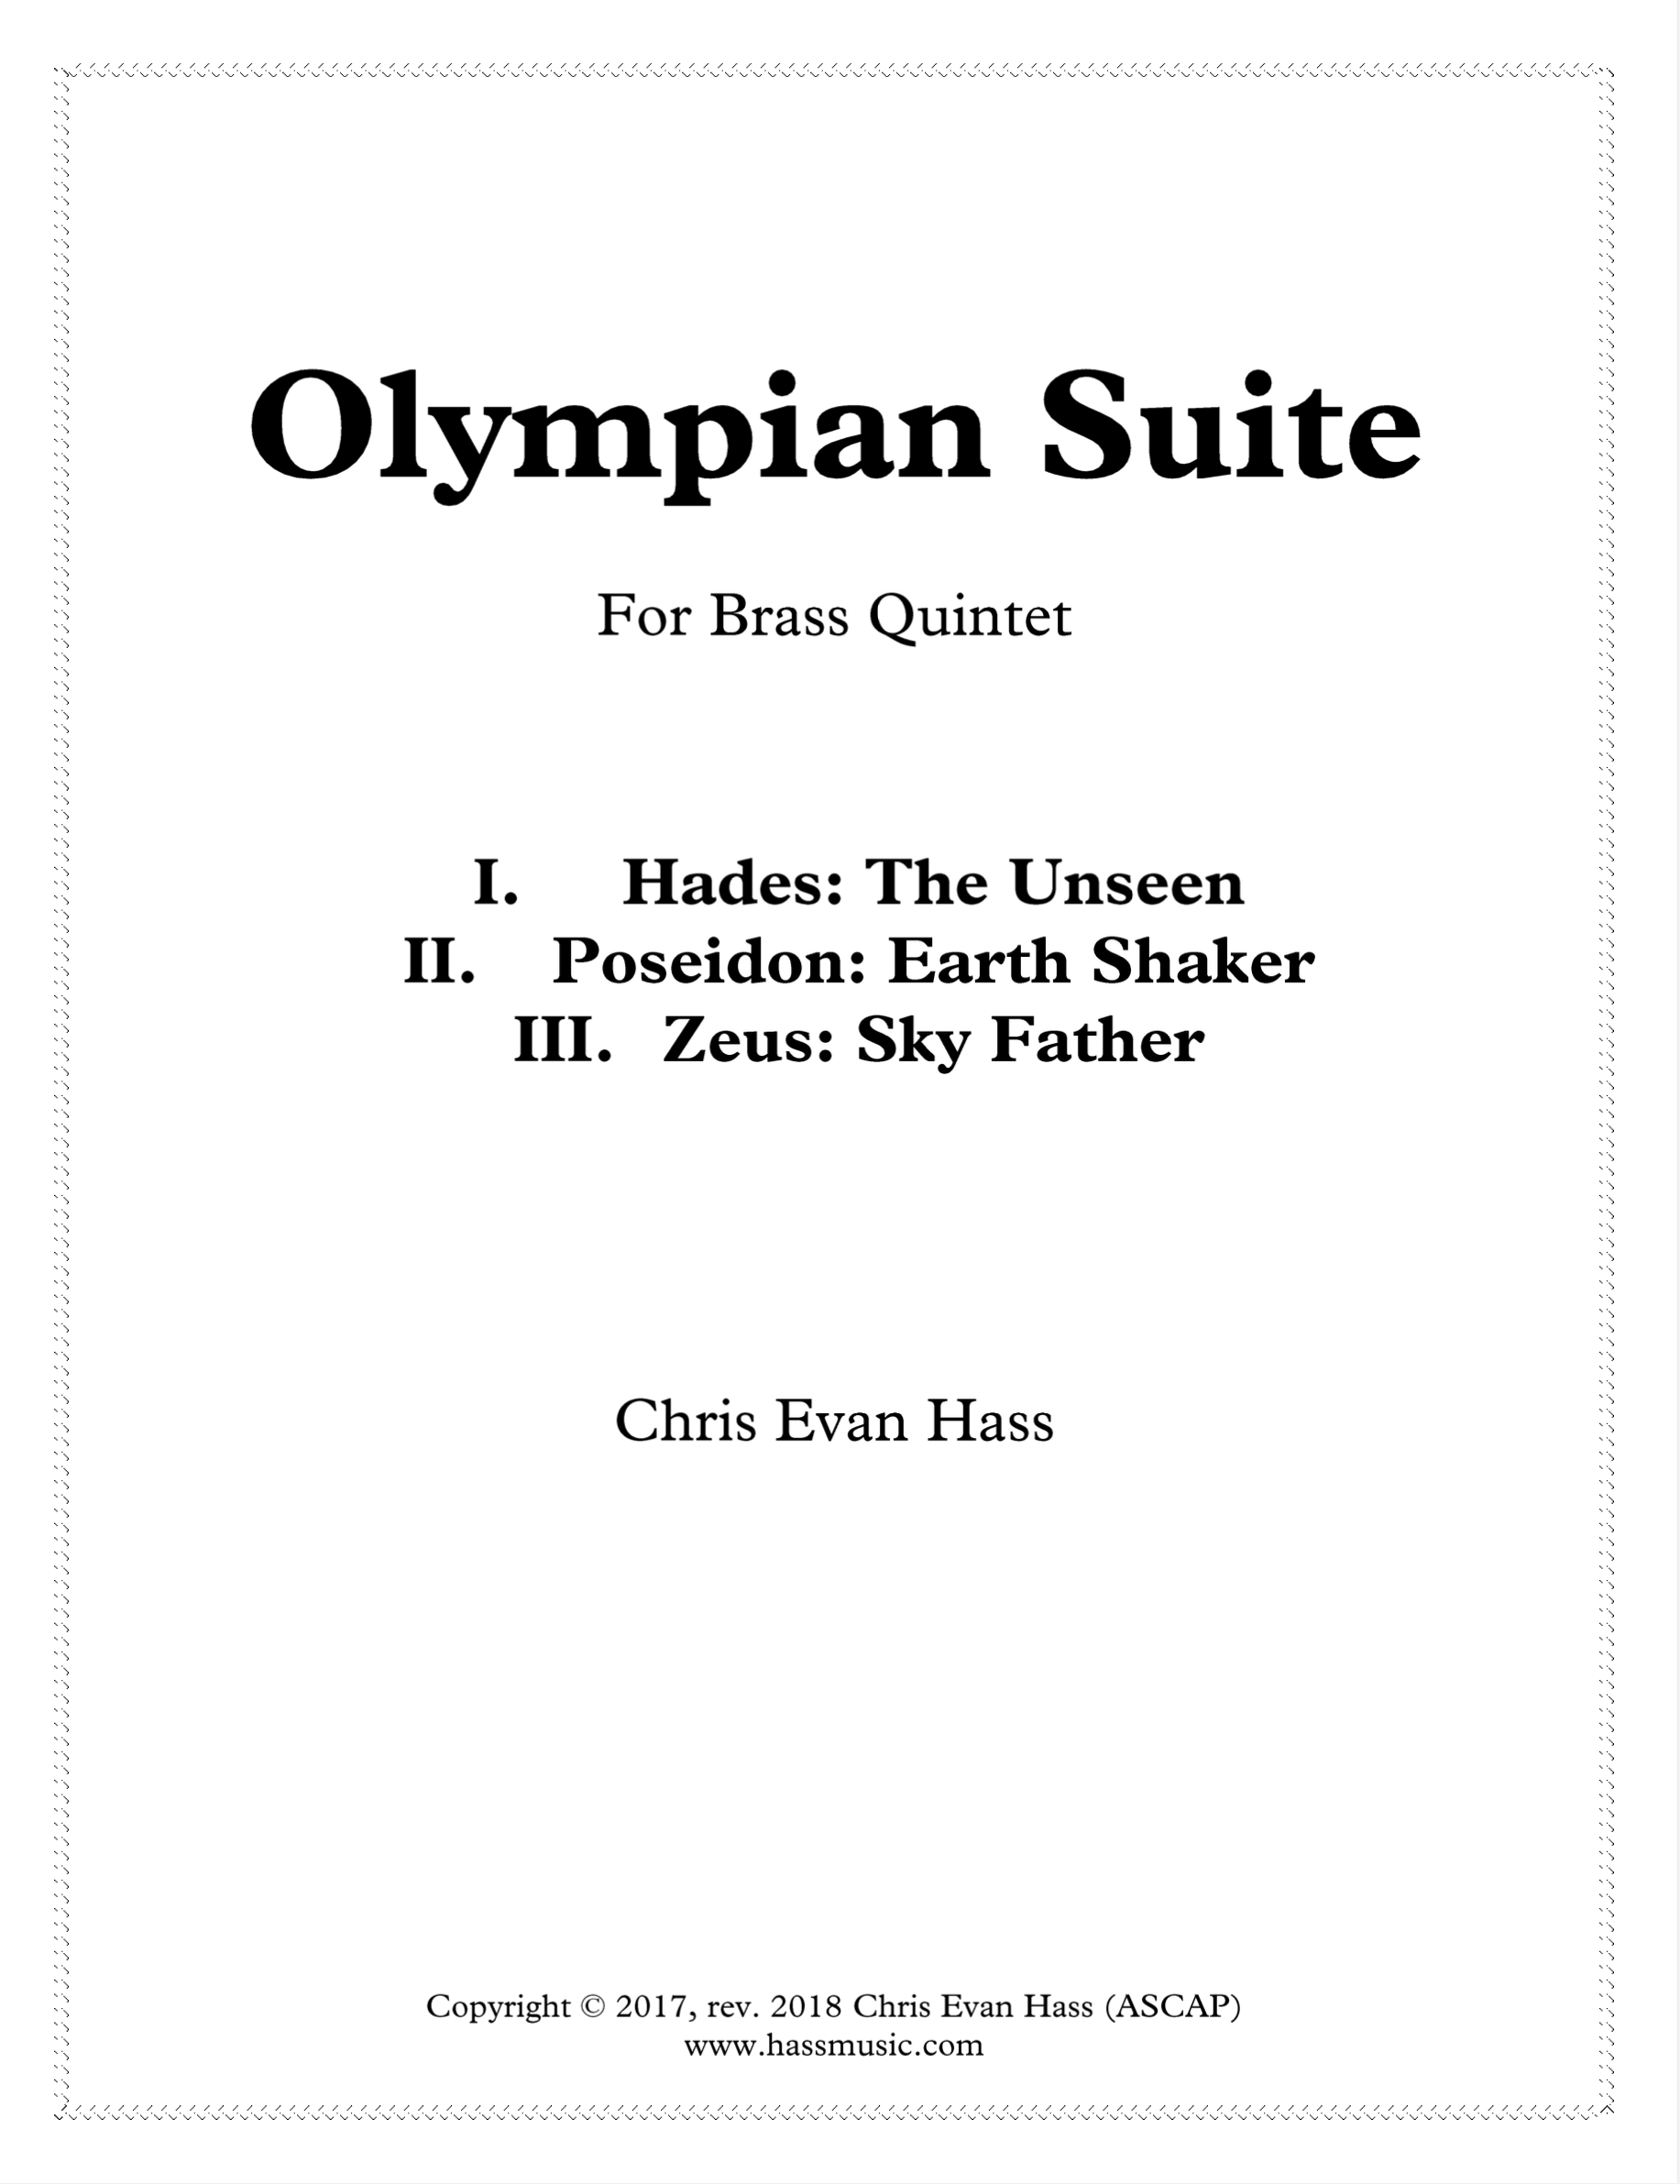 Olympian Suite by Chris Evan Hass